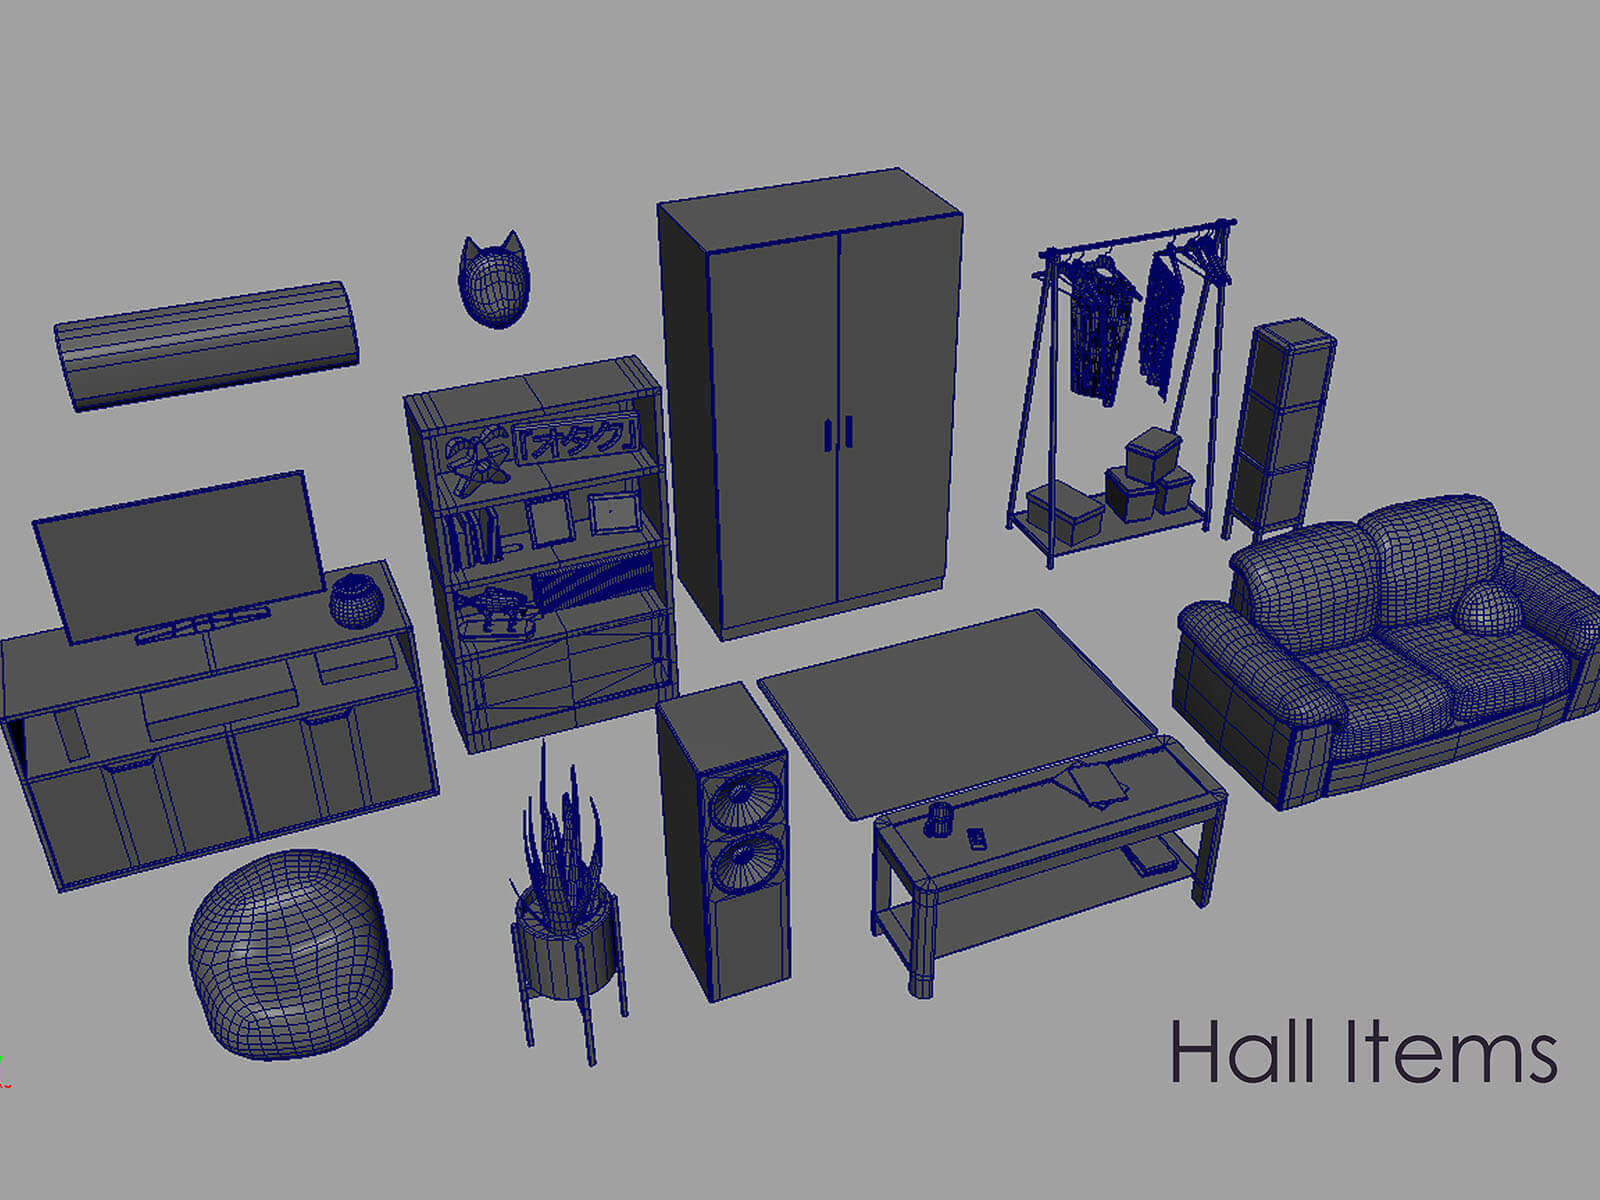 Collection of untextured 3D objects used in the scene's hallway